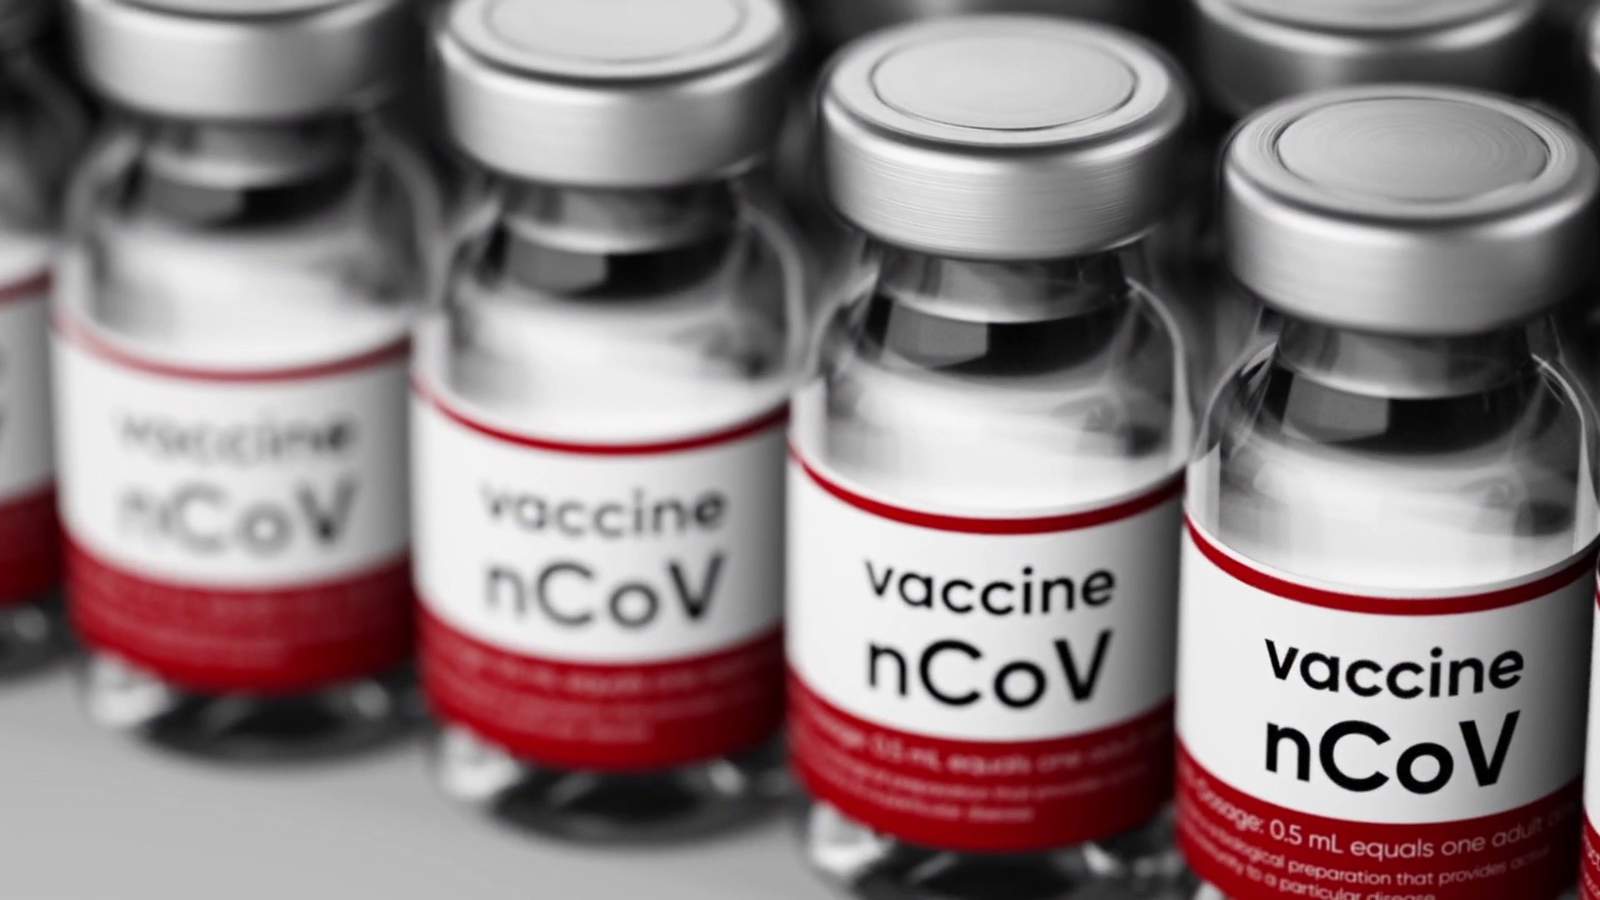 How long will it take to get a vaccine for COVID-19?